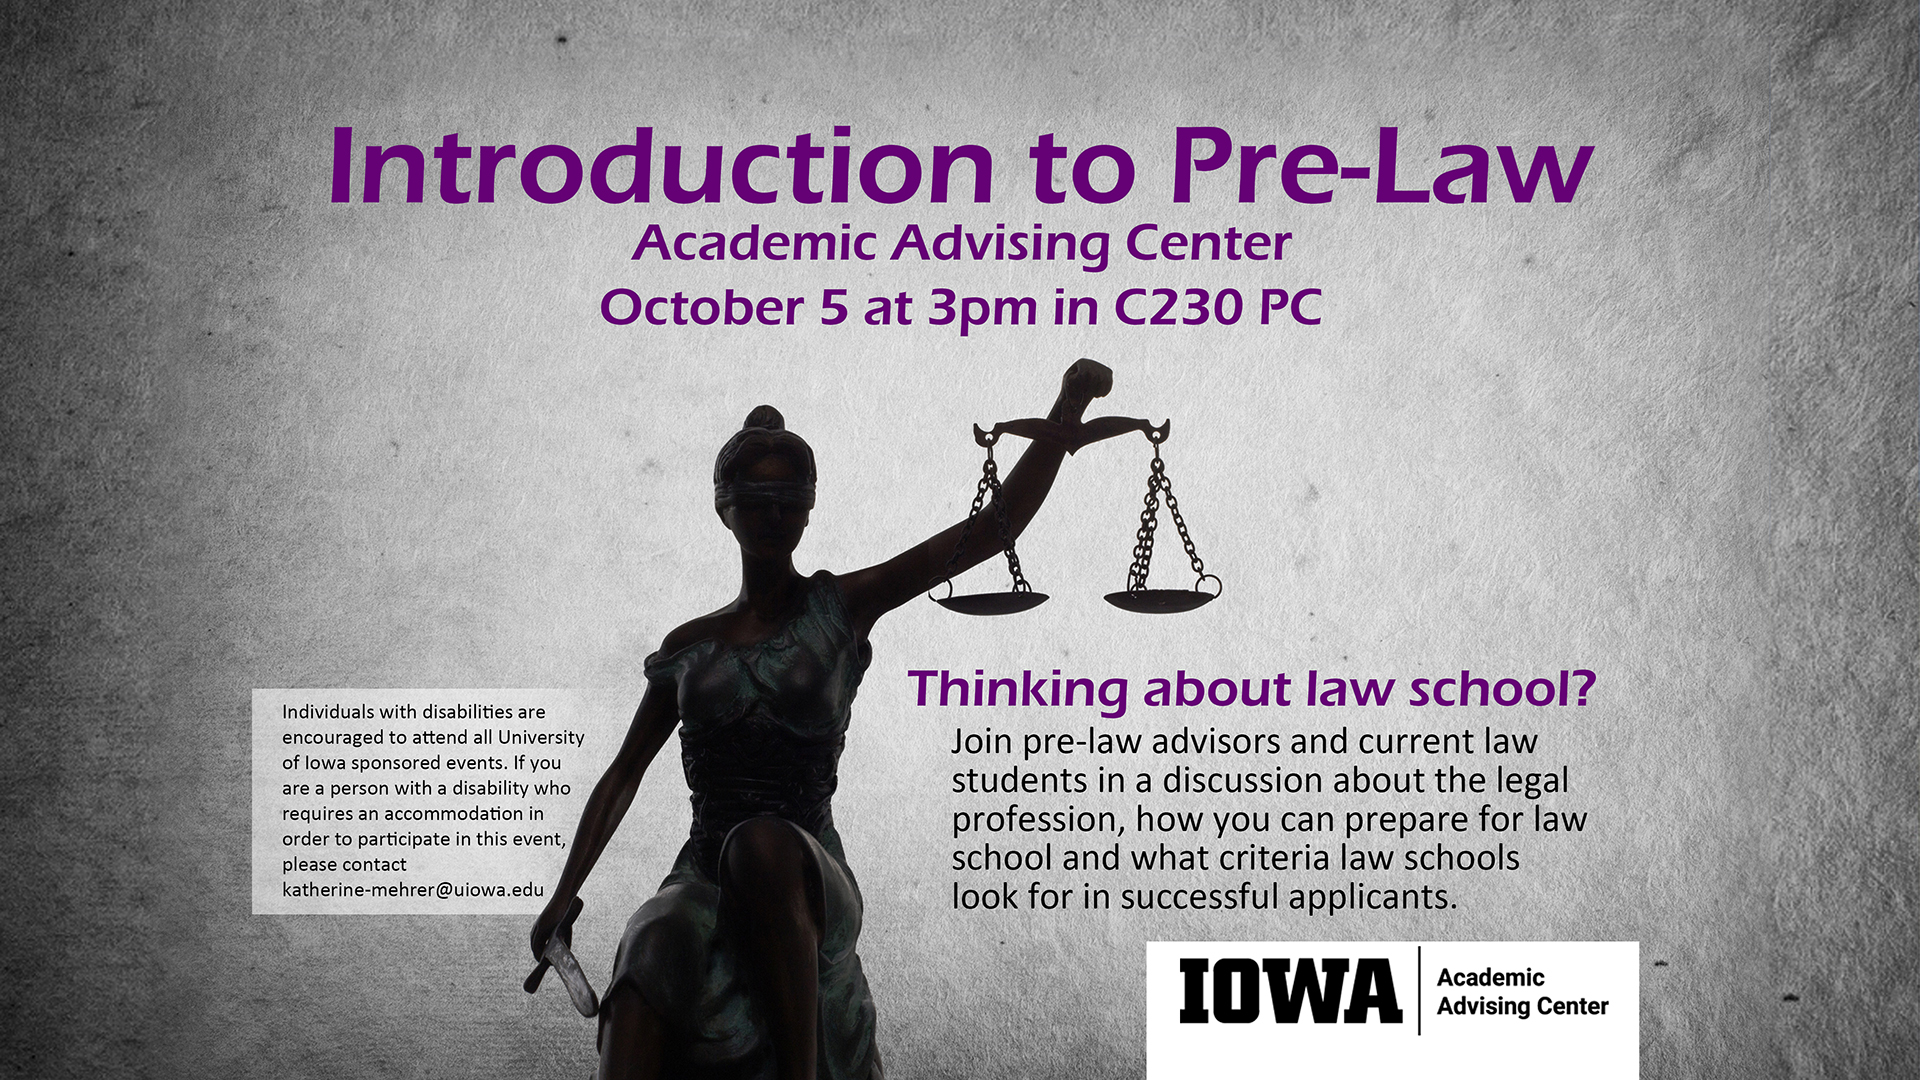 Pre-law session October 5 at 3pm in C230 PC